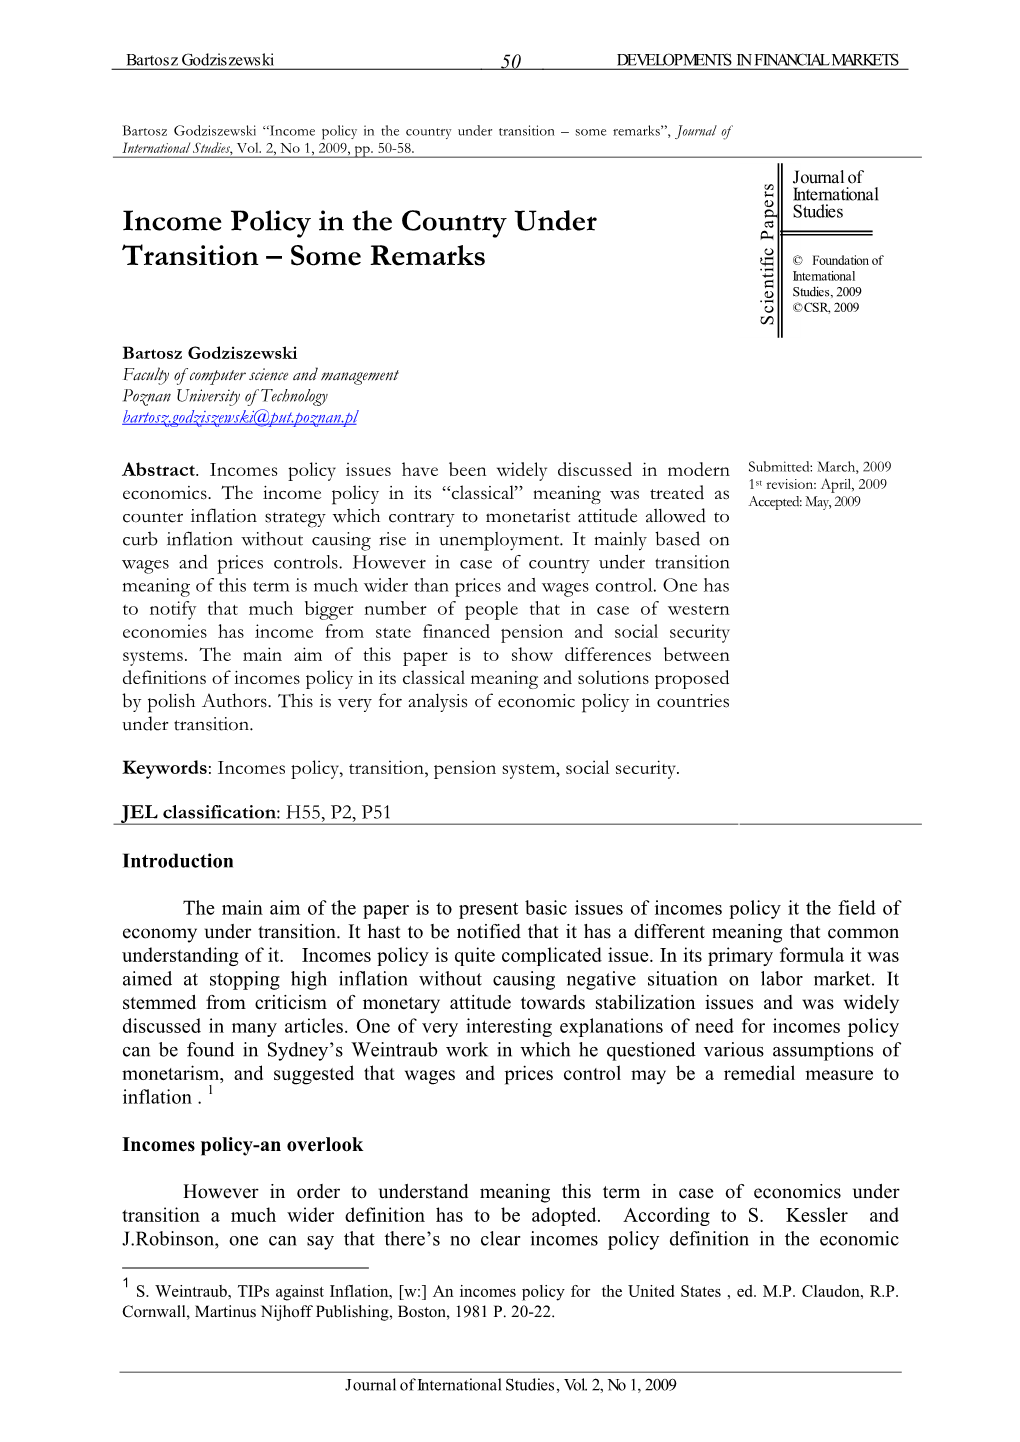 Income Policy in the Country Under Transition – Some Remarks”, Journal of International Studies, Vol